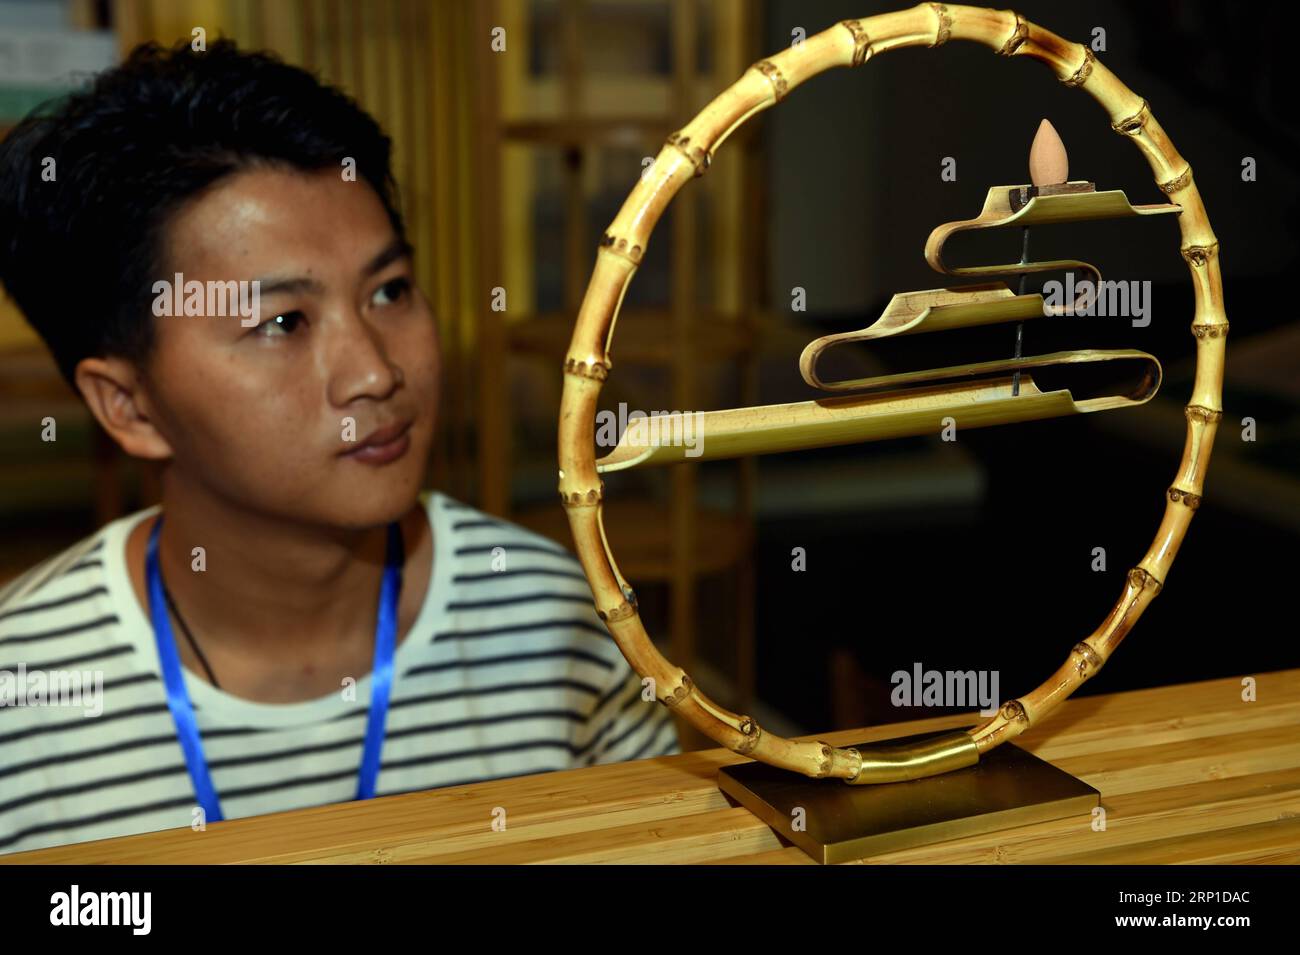 (180627) -- SHAOWU, June 27, 2018 -- Contestant Lai Hanshi from a furniture design firm in Zhongshan of Guangdong Province shows his bamboo design in the final round of Taichi Master Bamboo Industry International Industrial Design Competition 2018 in Shaowu, southeast China s Fujian Province, June 27, 2018. The competition received 6,517 bamboo designs from global contestants, with 25 pieces of works being qualified for the final round. ) (lmm) CHINA-FUJIAN-BAMBOO-INDUSTRIAL DESIGN-COMPETITION (CN) PengxZhangqing PUBLICATIONxNOTxINxCHN Stock Photo